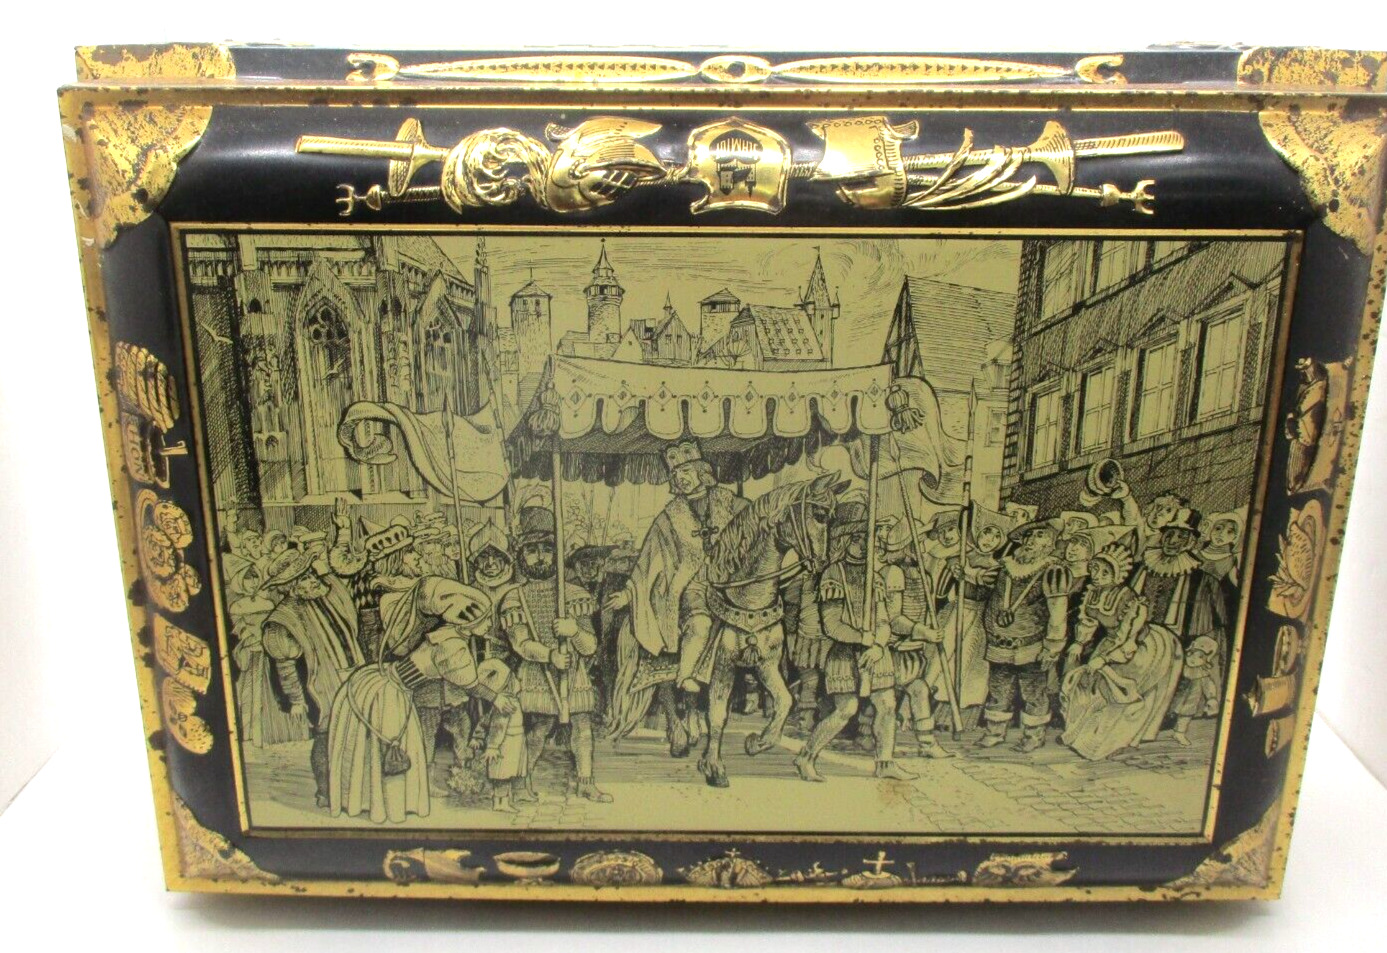 E Otto Schmidt Nurnberg Germany Gingerbread Tin Metal Box Imperial Jewels